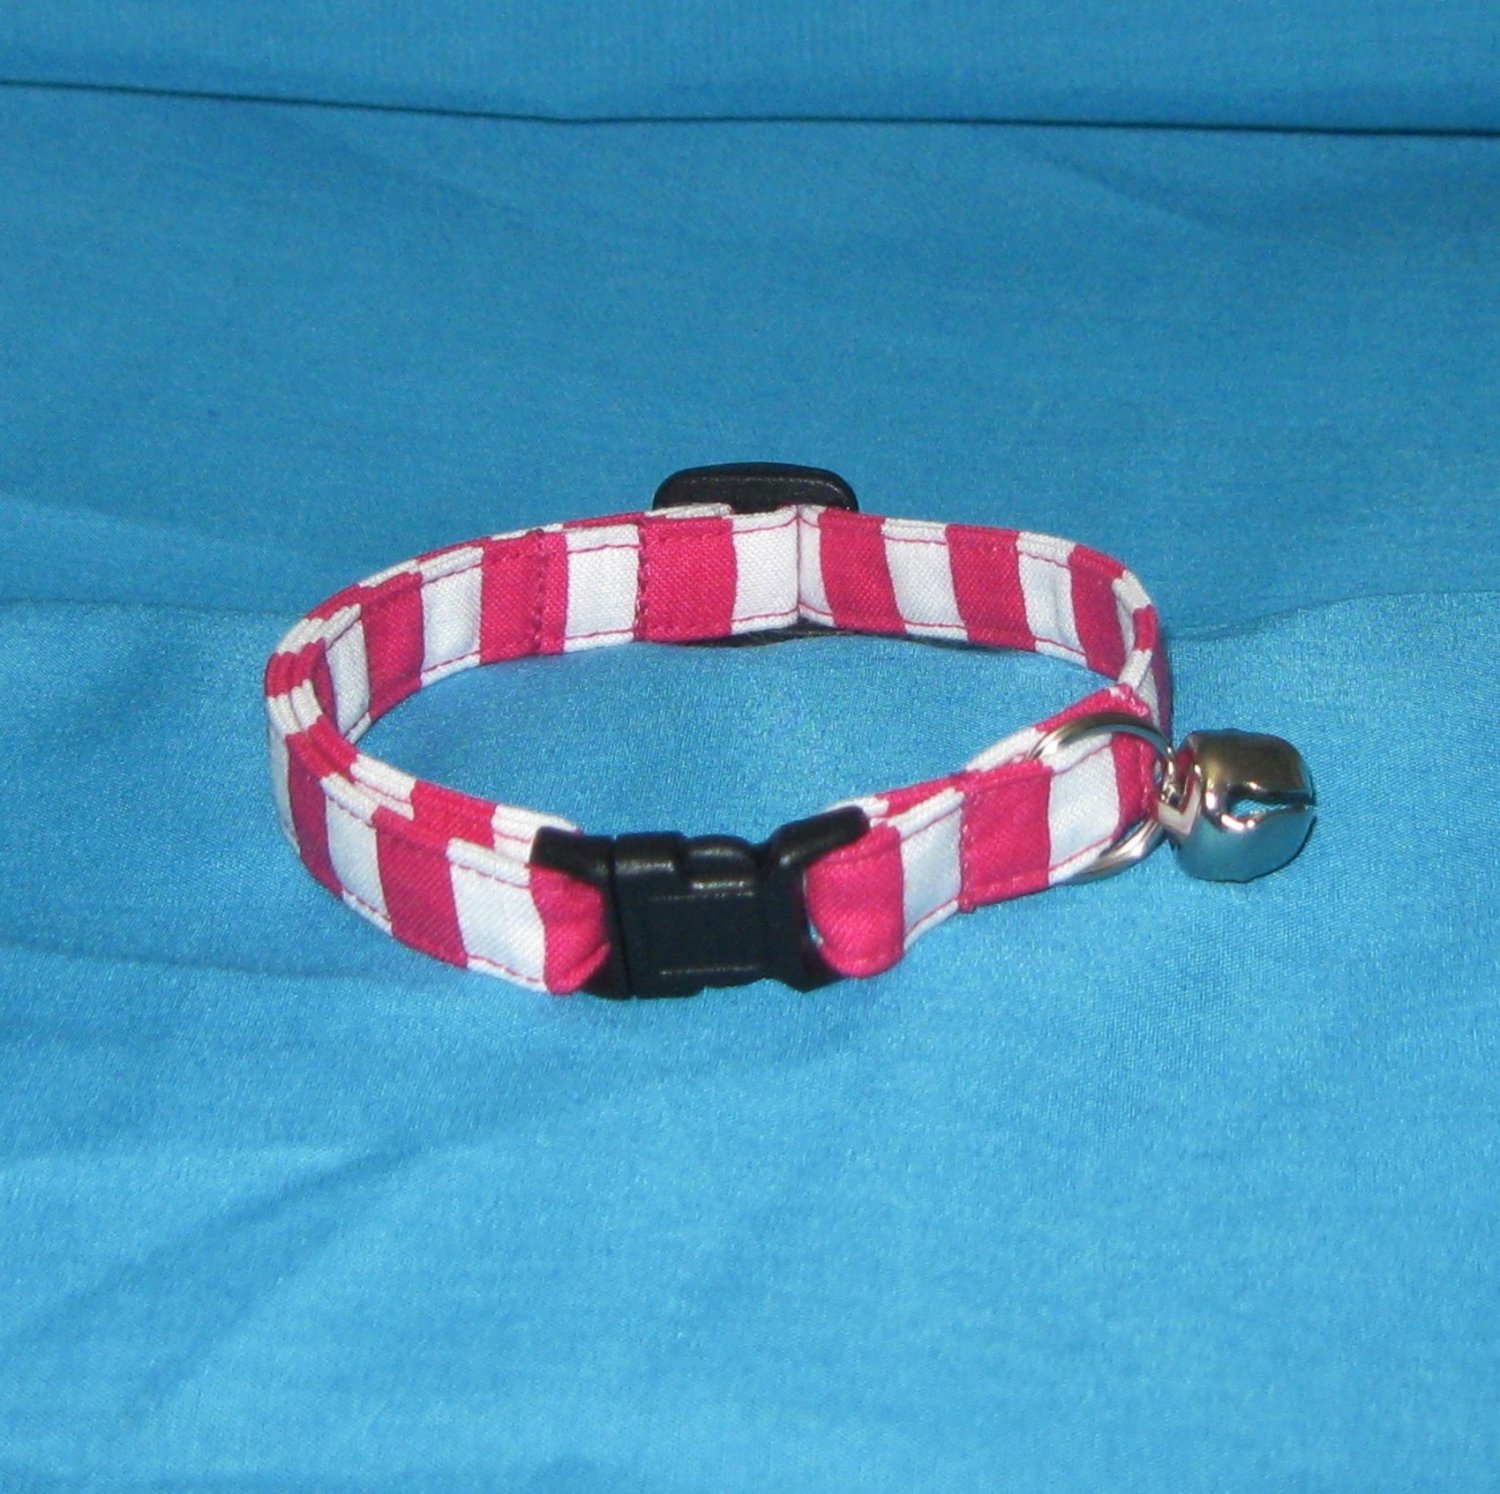 Cotton Safety Collar for Cats in Bright Pink and White Vertical Stripes, Awning Stripe Kitty Collar